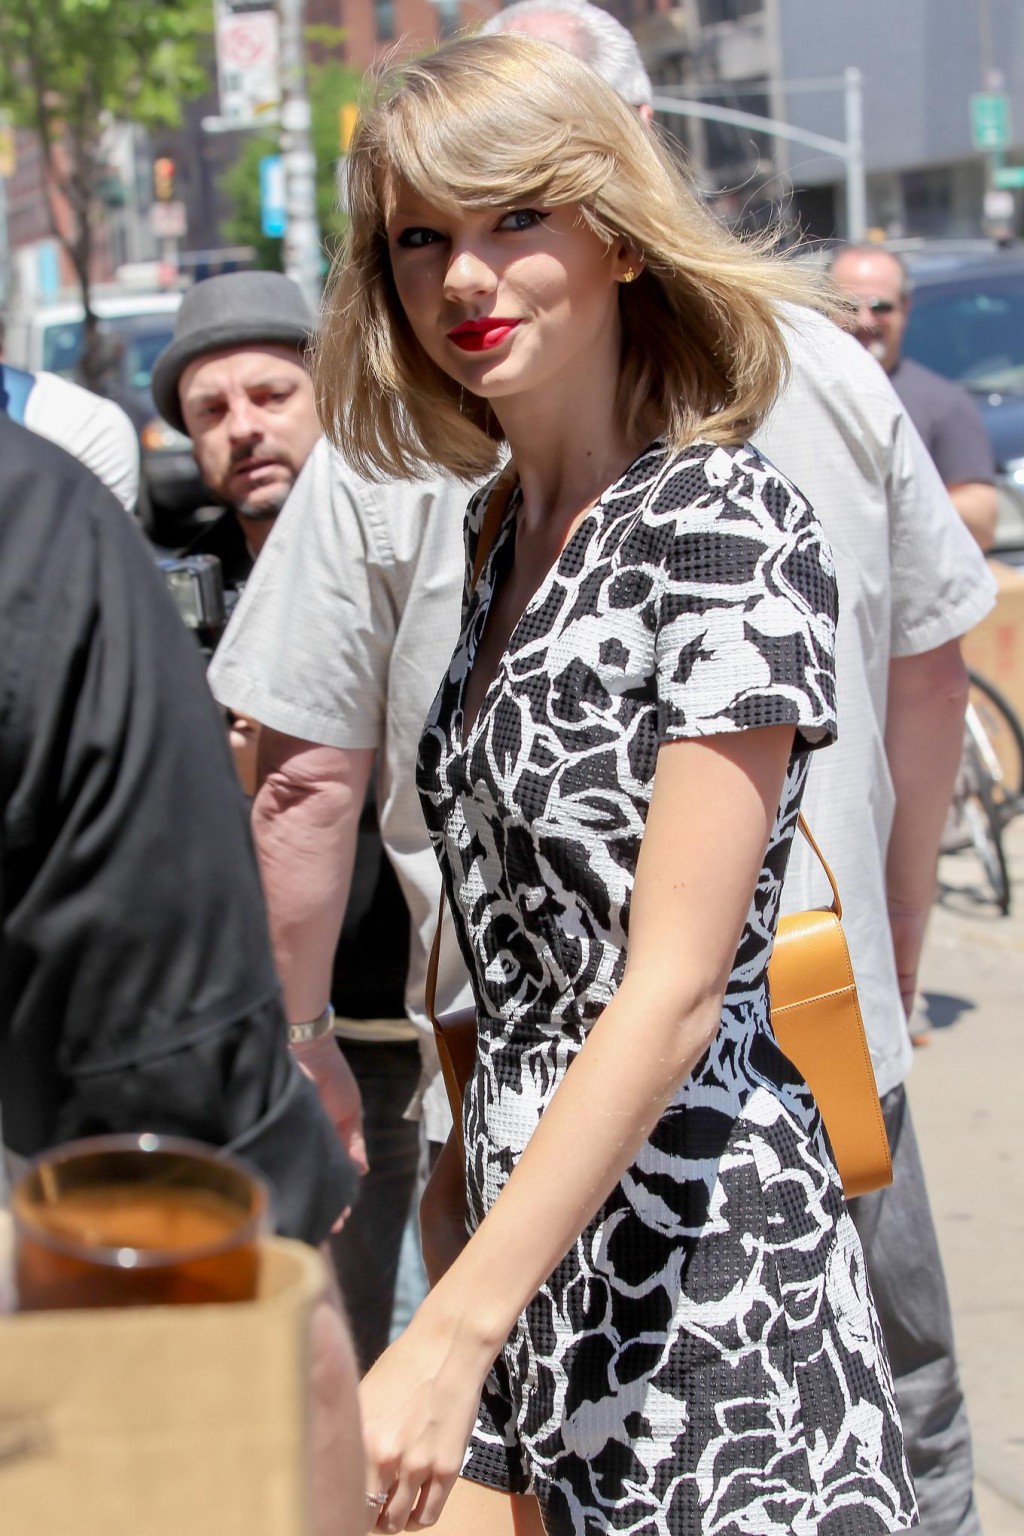 Taylor Swift leggy wearing a monochorome romper suit out in NYC #75196089